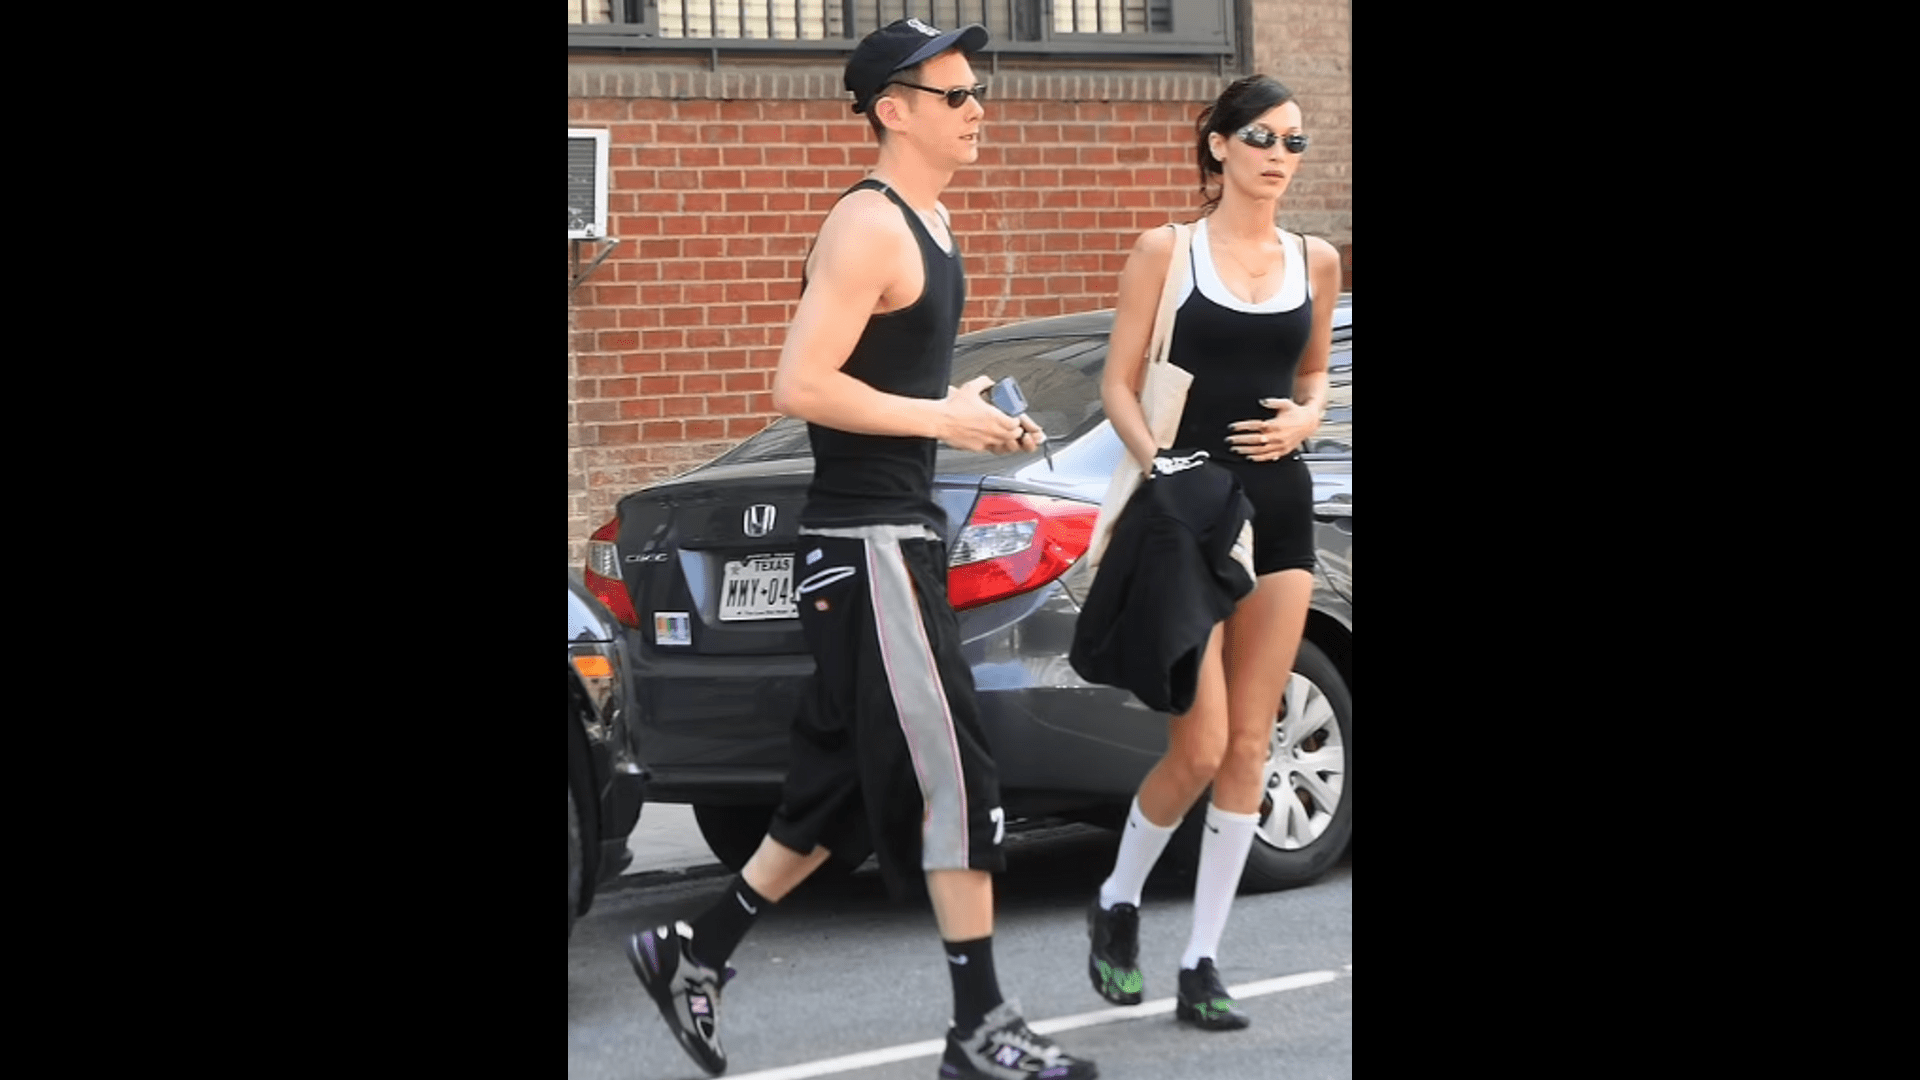 bella-hadid-and-her-boyfriend-marc-kalman-were-spotted-on-their-way-to-the-gym